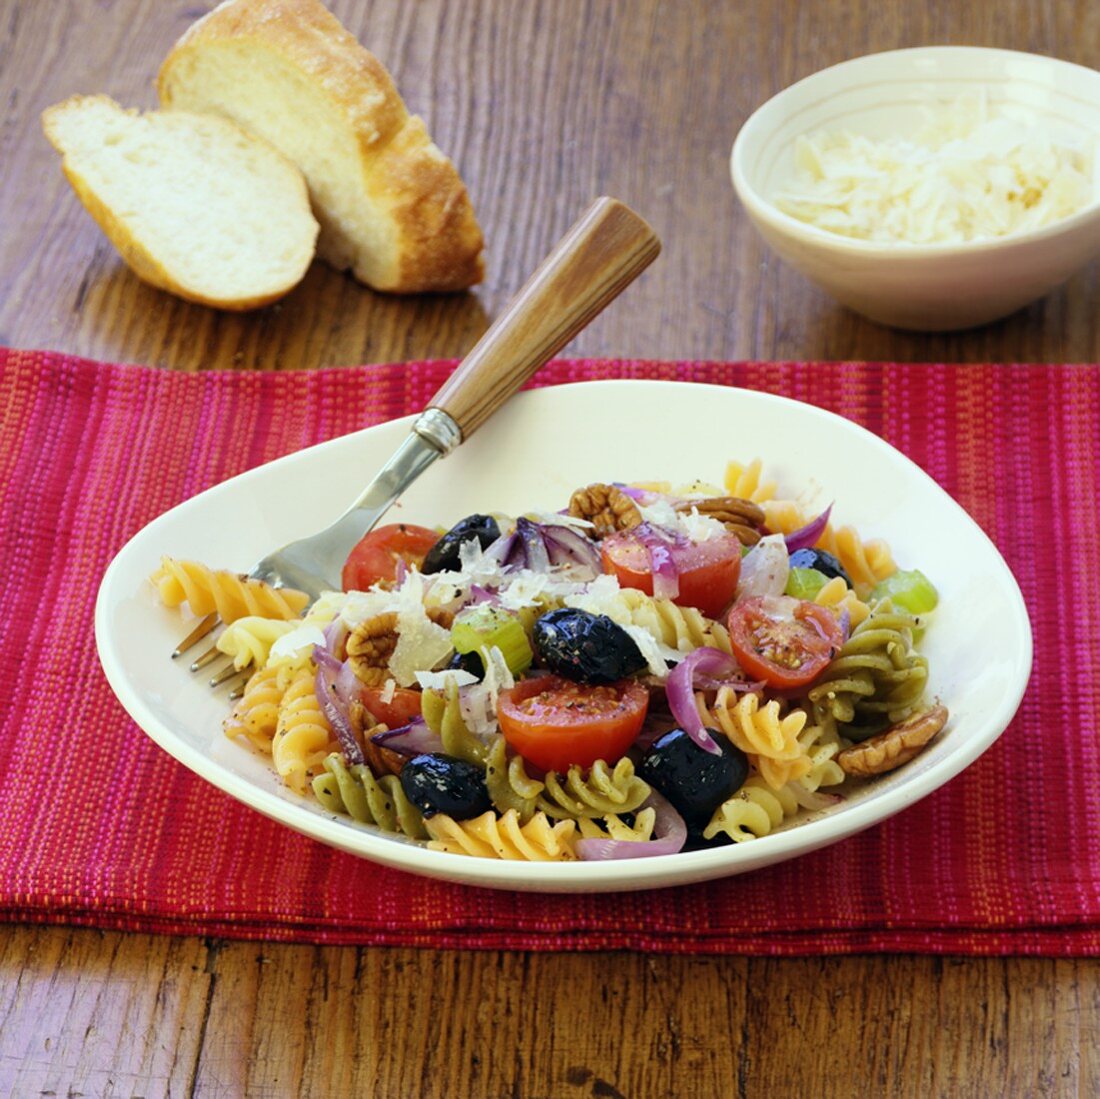 Pasta salad with olives, tomatoes and walnut